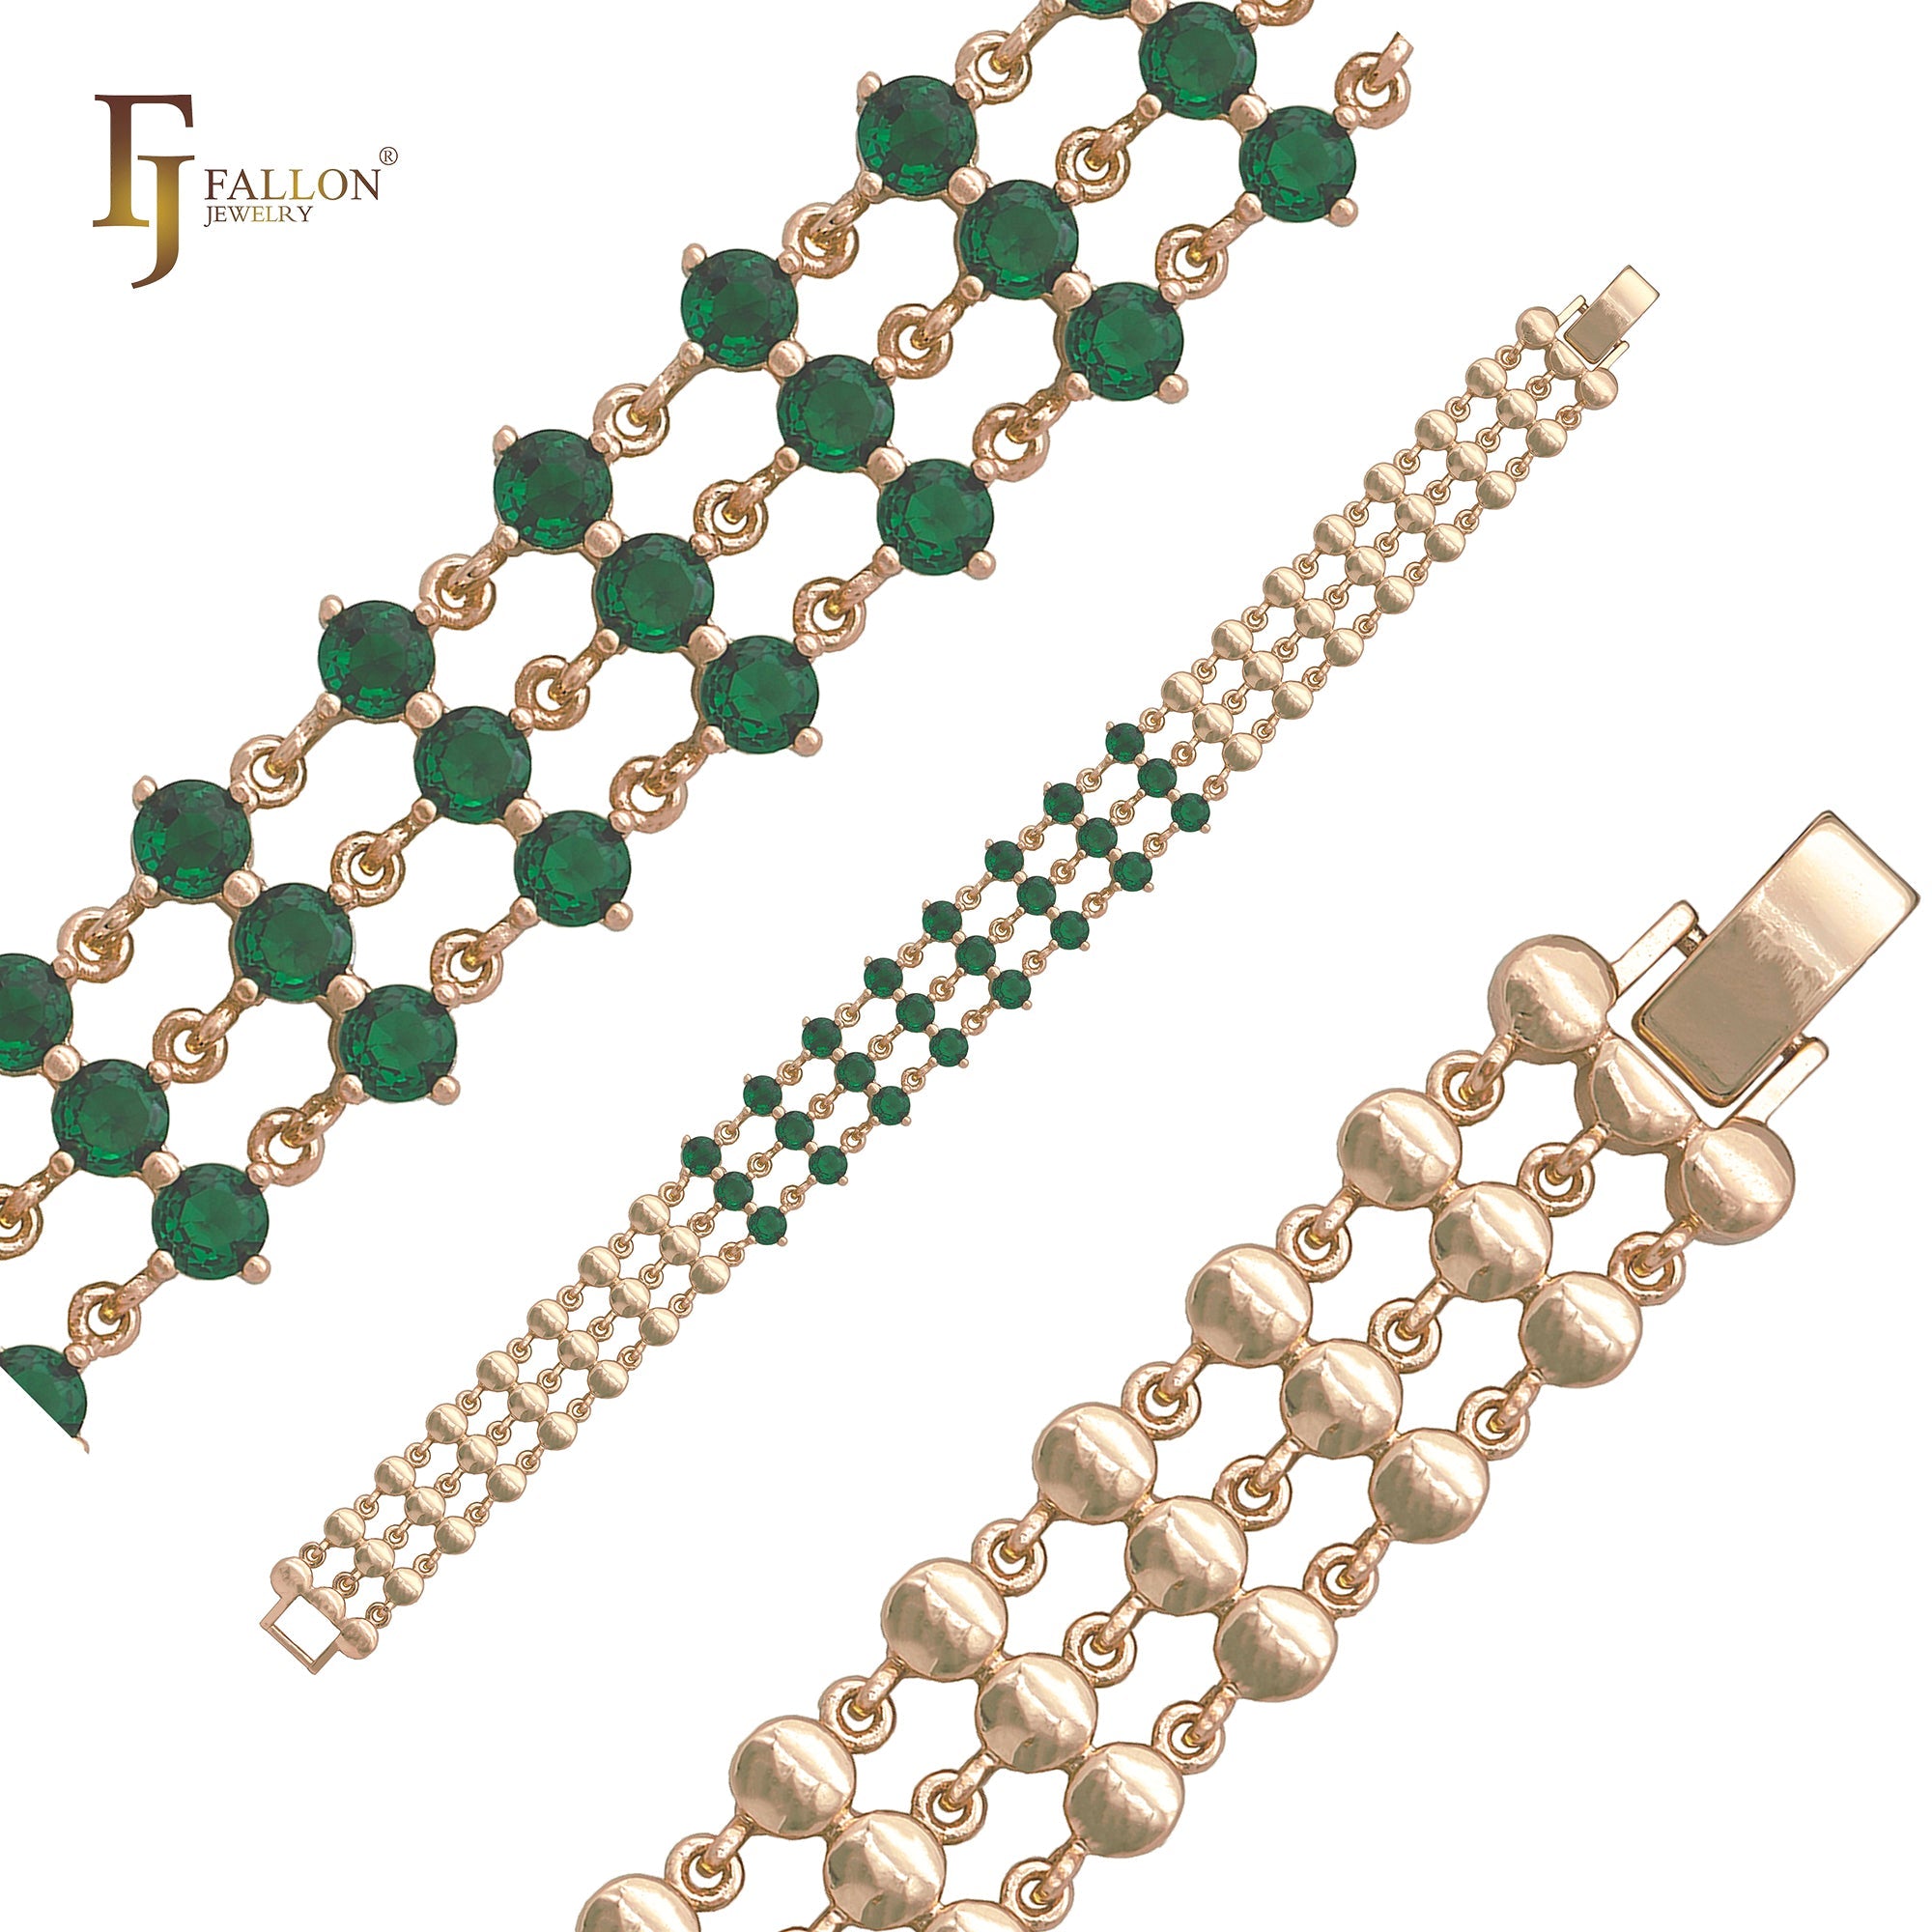 New developing triple layer disc and CZs link Emerald mixed White CZs 14K Gold, Rose Gold, White Gold Bracelets